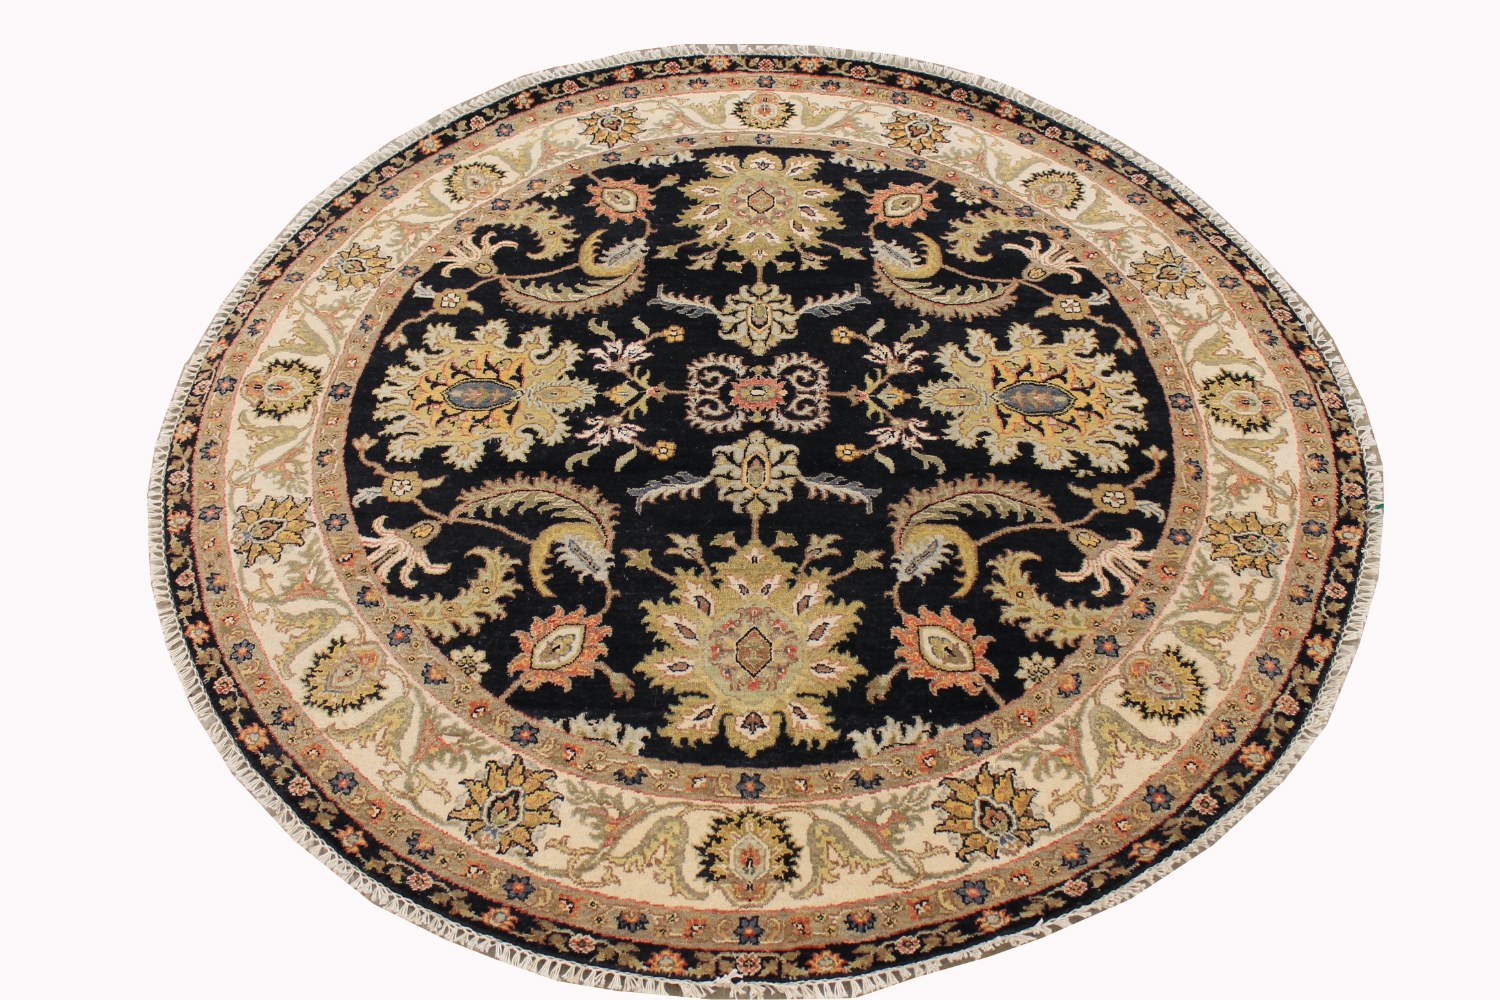 6 ft. - 7 ft. Round & Square Traditional Hand Knotted Wool Area Rug - MR028561